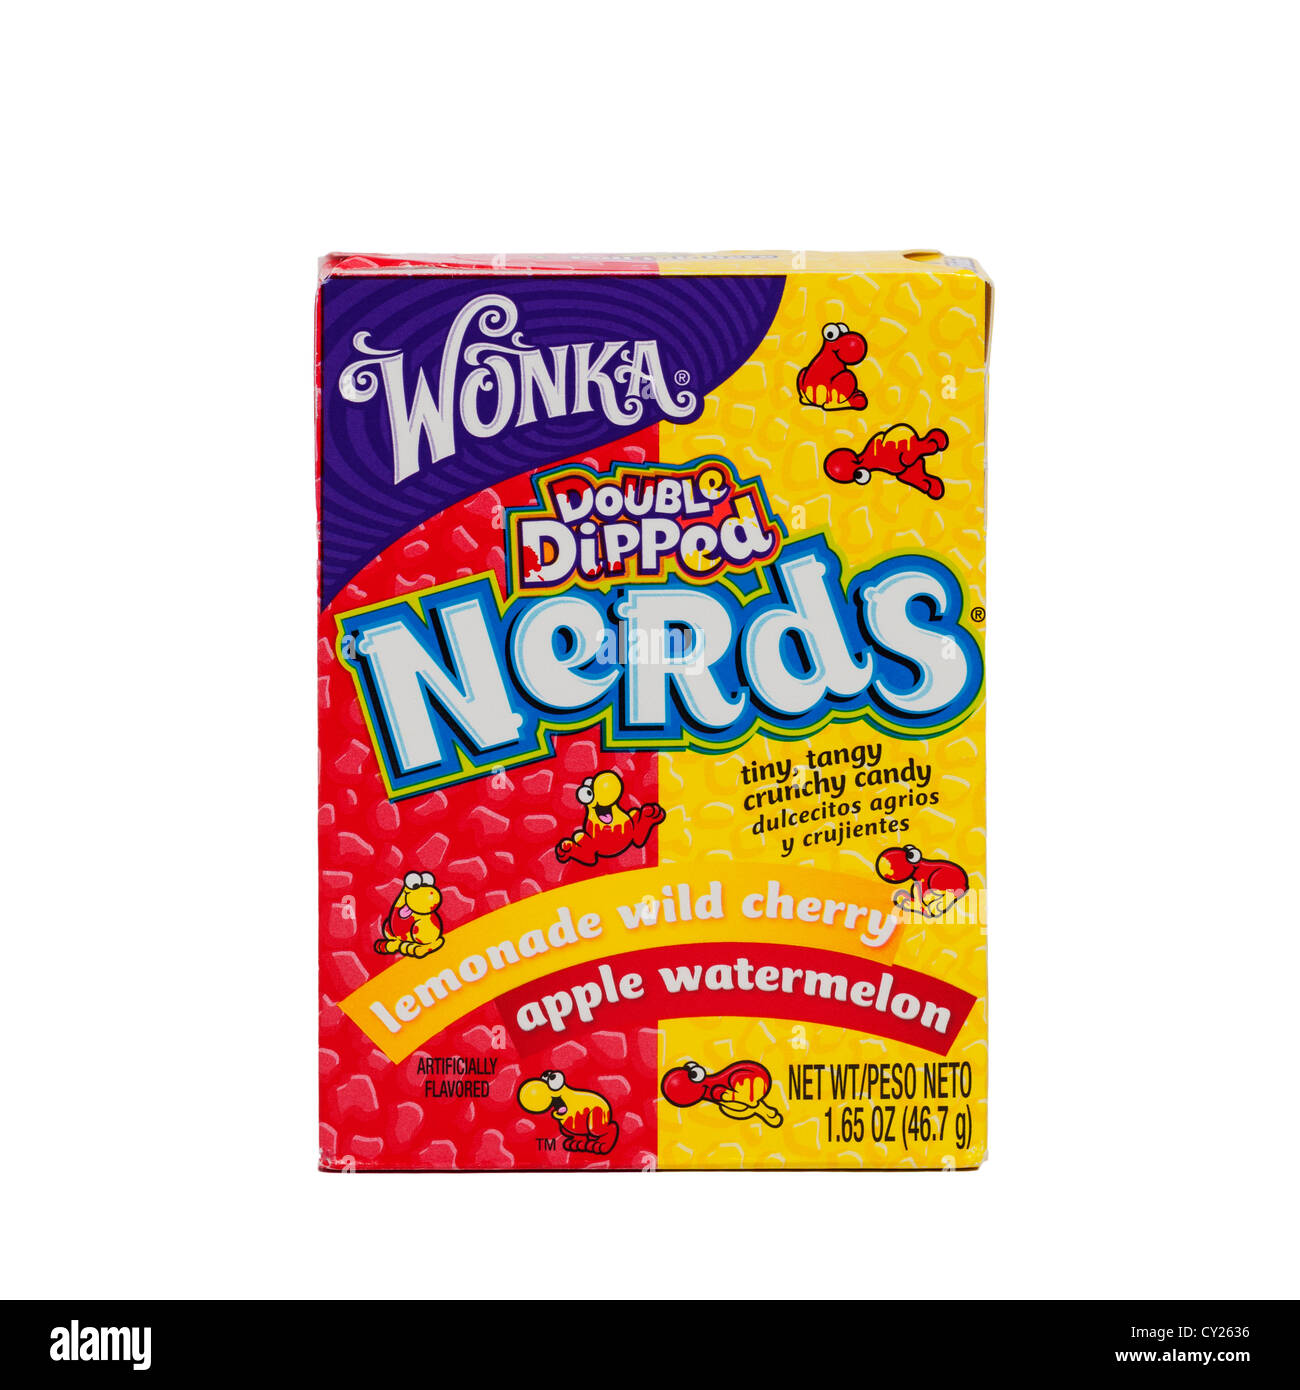 https://c8.alamy.com/comp/CY2636/a-packet-of-wonka-nerds-sweets-candy-on-a-white-background-CY2636.jpg